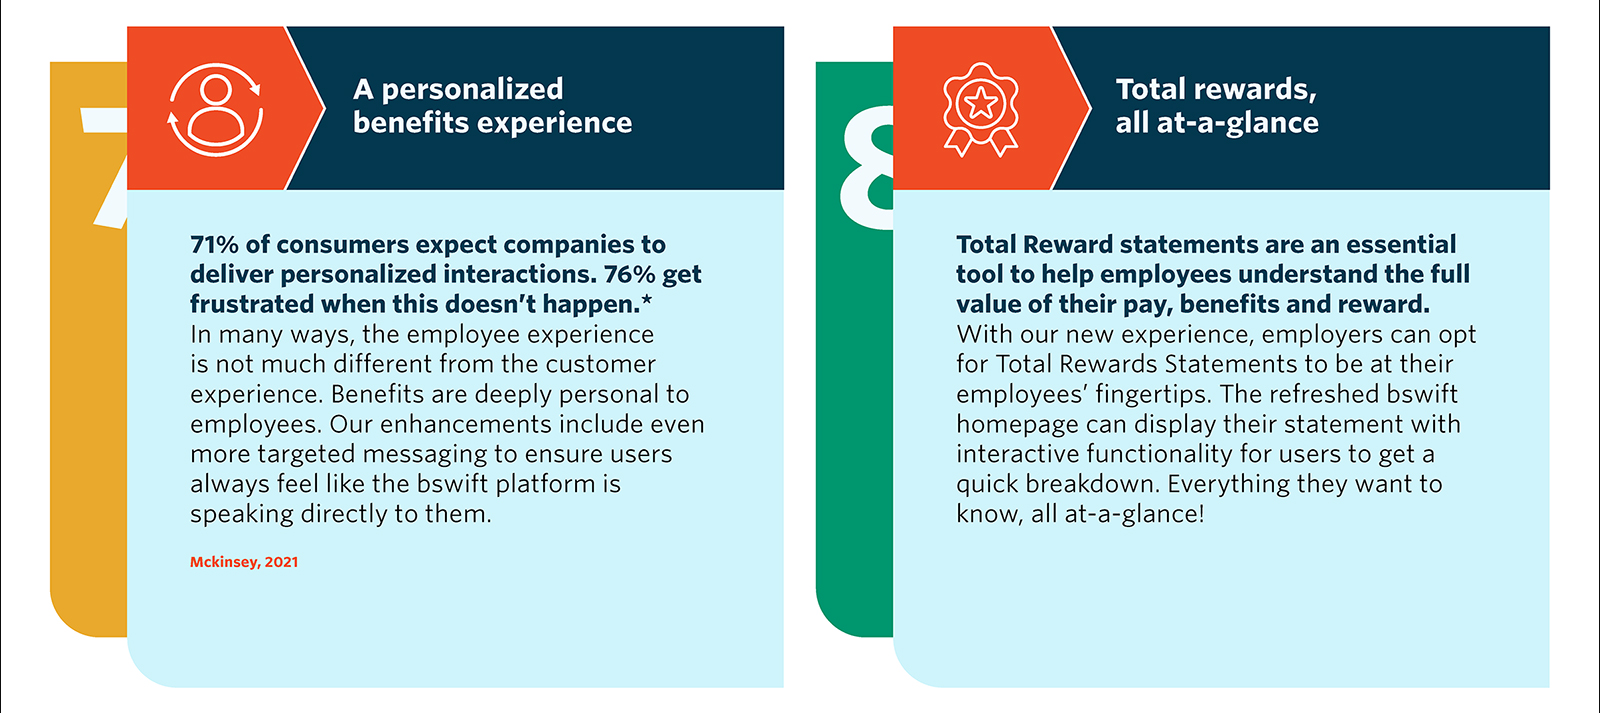 A personalized benefits experience | Total rewards, all at-a-glance